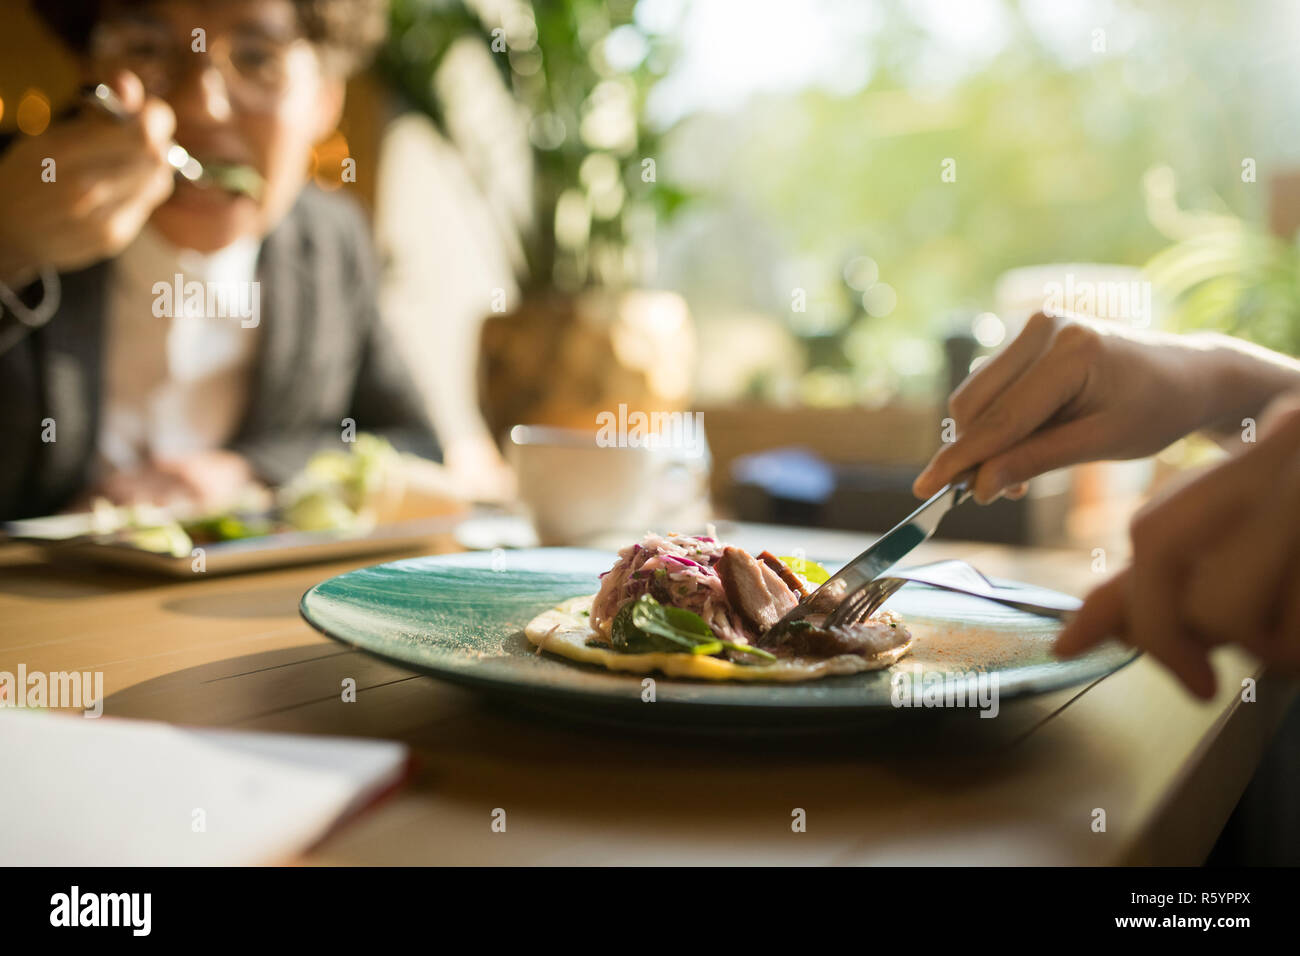 Cutting meat slice while eating delicious dish Stock Photo